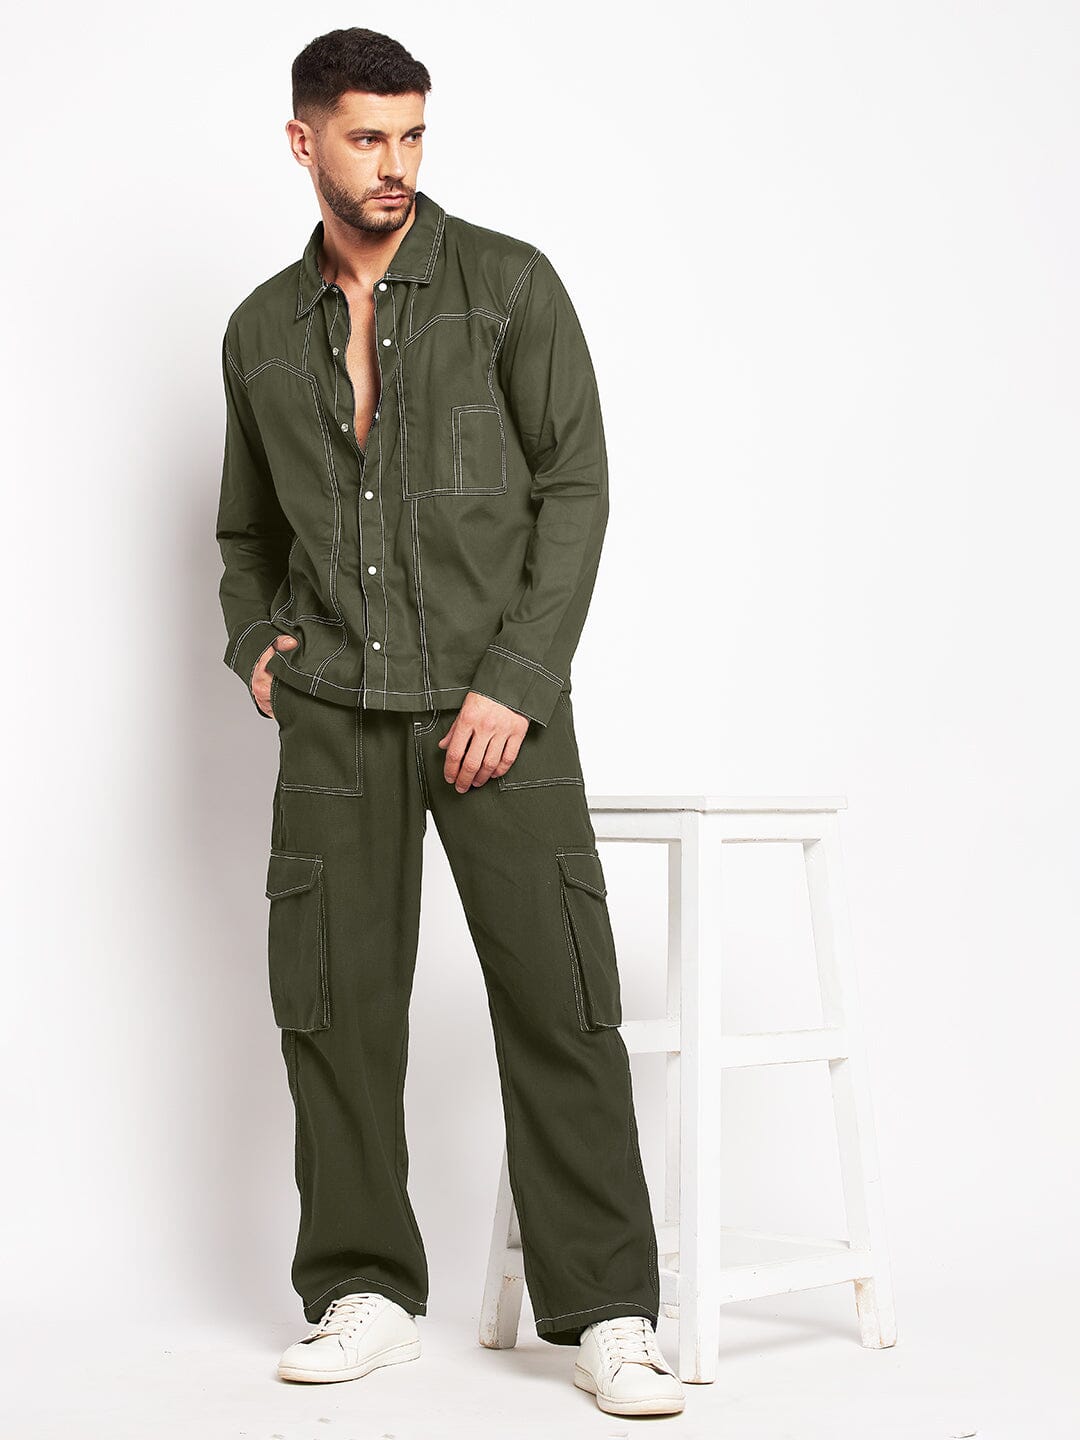 Dusty Olive Wide Leg Cargo Pants with White Stitching | Lime Lush